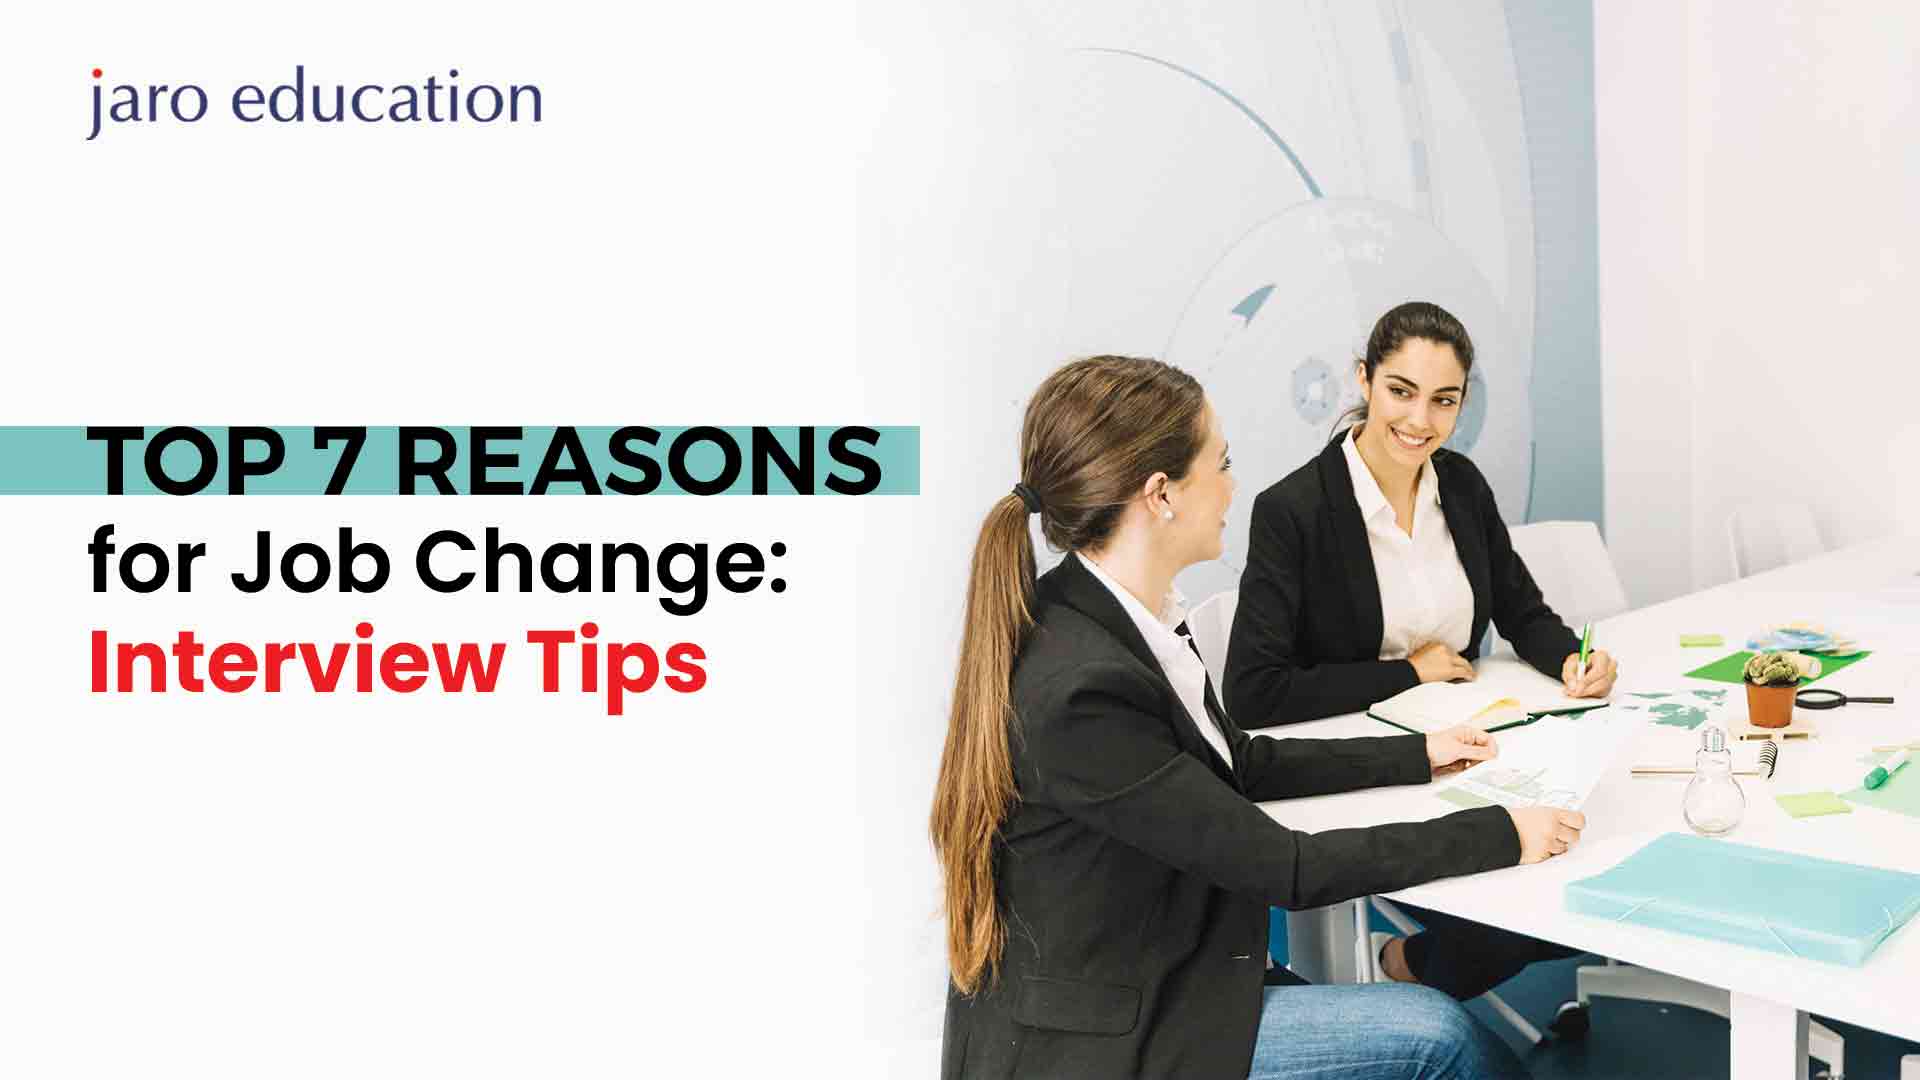 Top 7 Reasons for Job Change Interview Tips